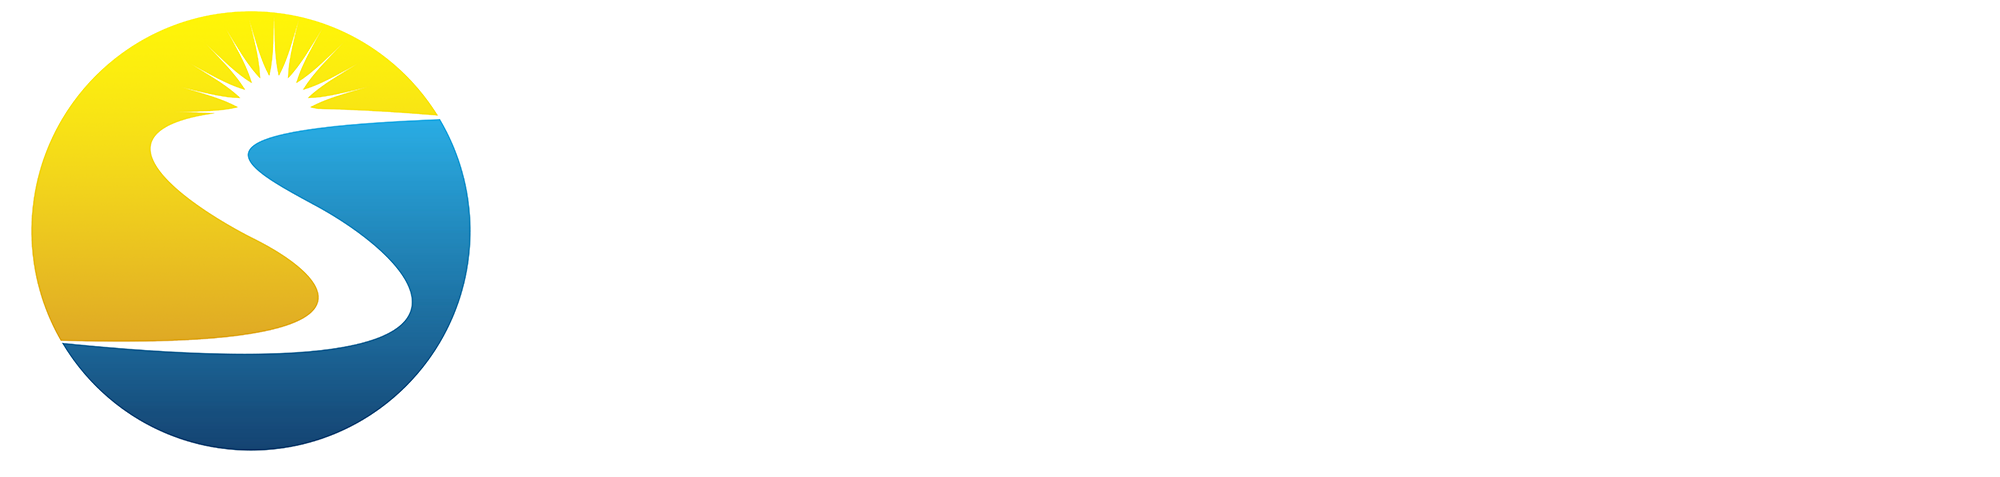 SouthPoint Mental Health Services